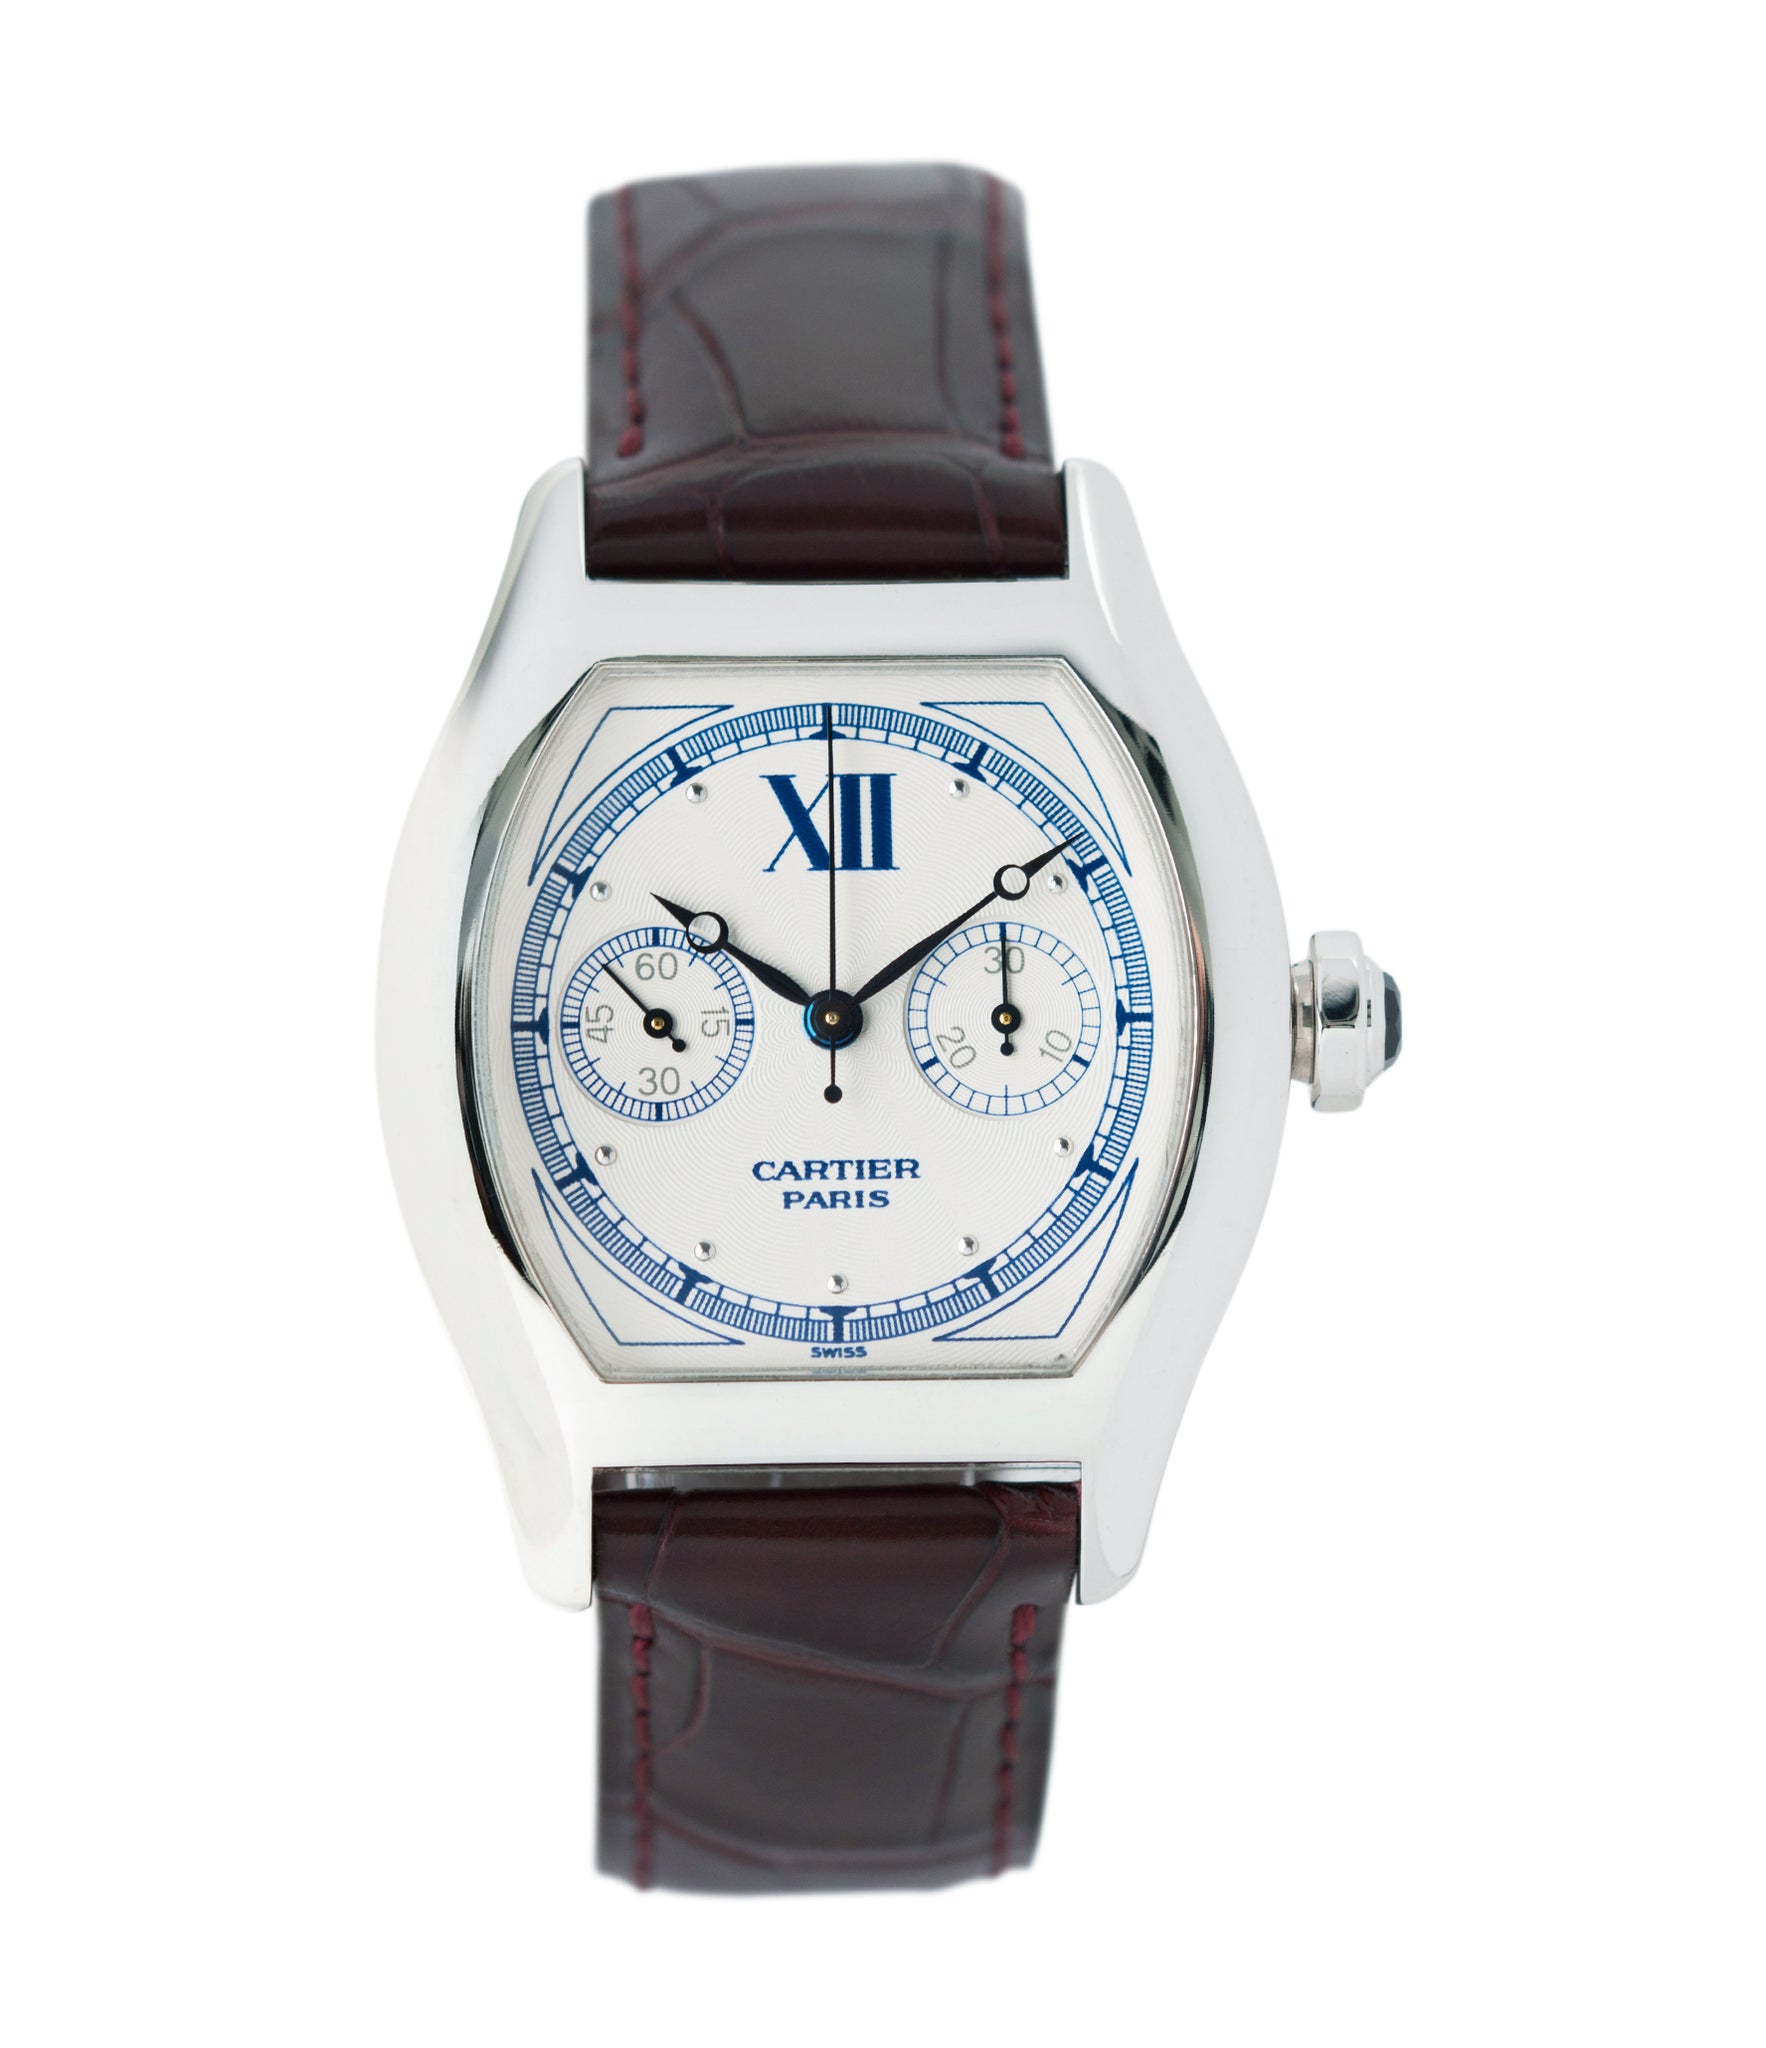 buy Cartier Monopusher Monopoussoir ref. 2396 white gold dress watch with THA ebauche for sale online at A Collected Man London UK specialist of rare watches